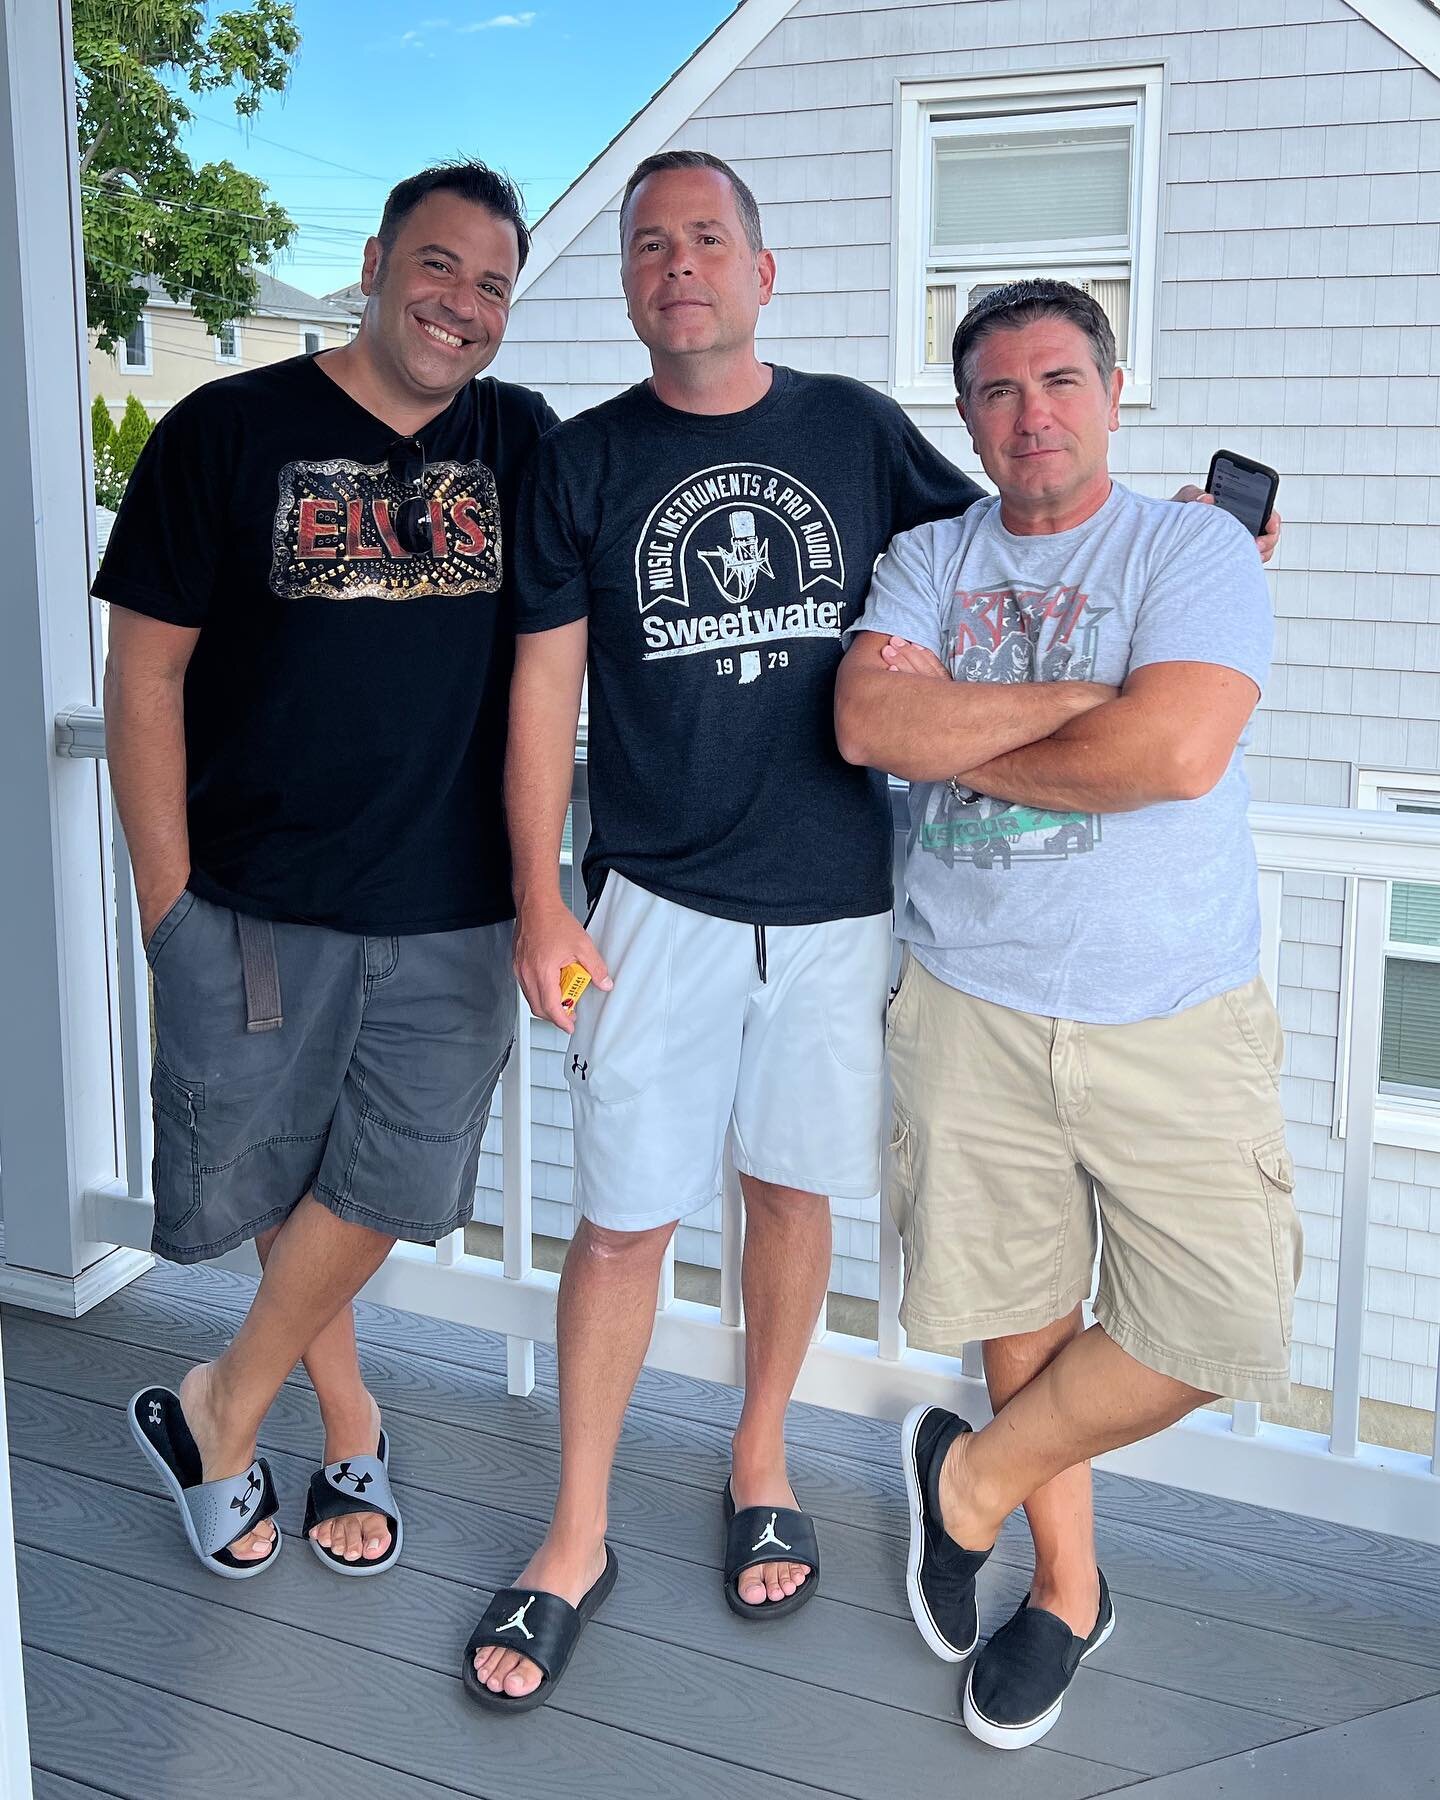 Mele, Lando Point Pleasant, NJ Summer of 2022.
Never know what can happen when 3 drummers are hanging out!
#andrewmele #joelando #uplatewithjohnnypotenza